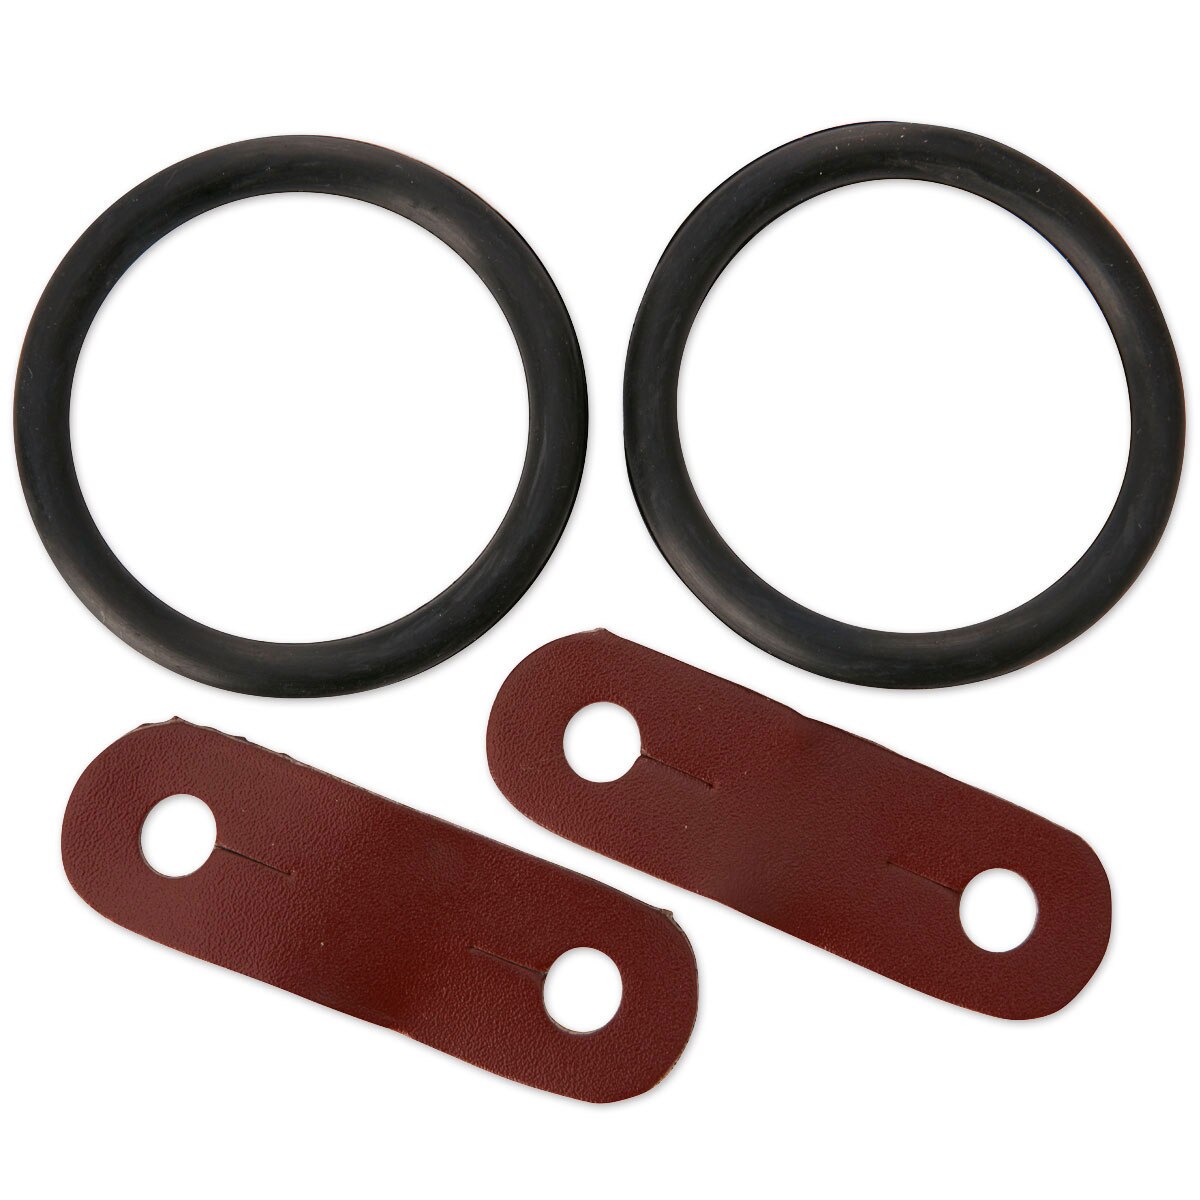 Bitz Rubber Rings For Peacock Safety Stirrups 